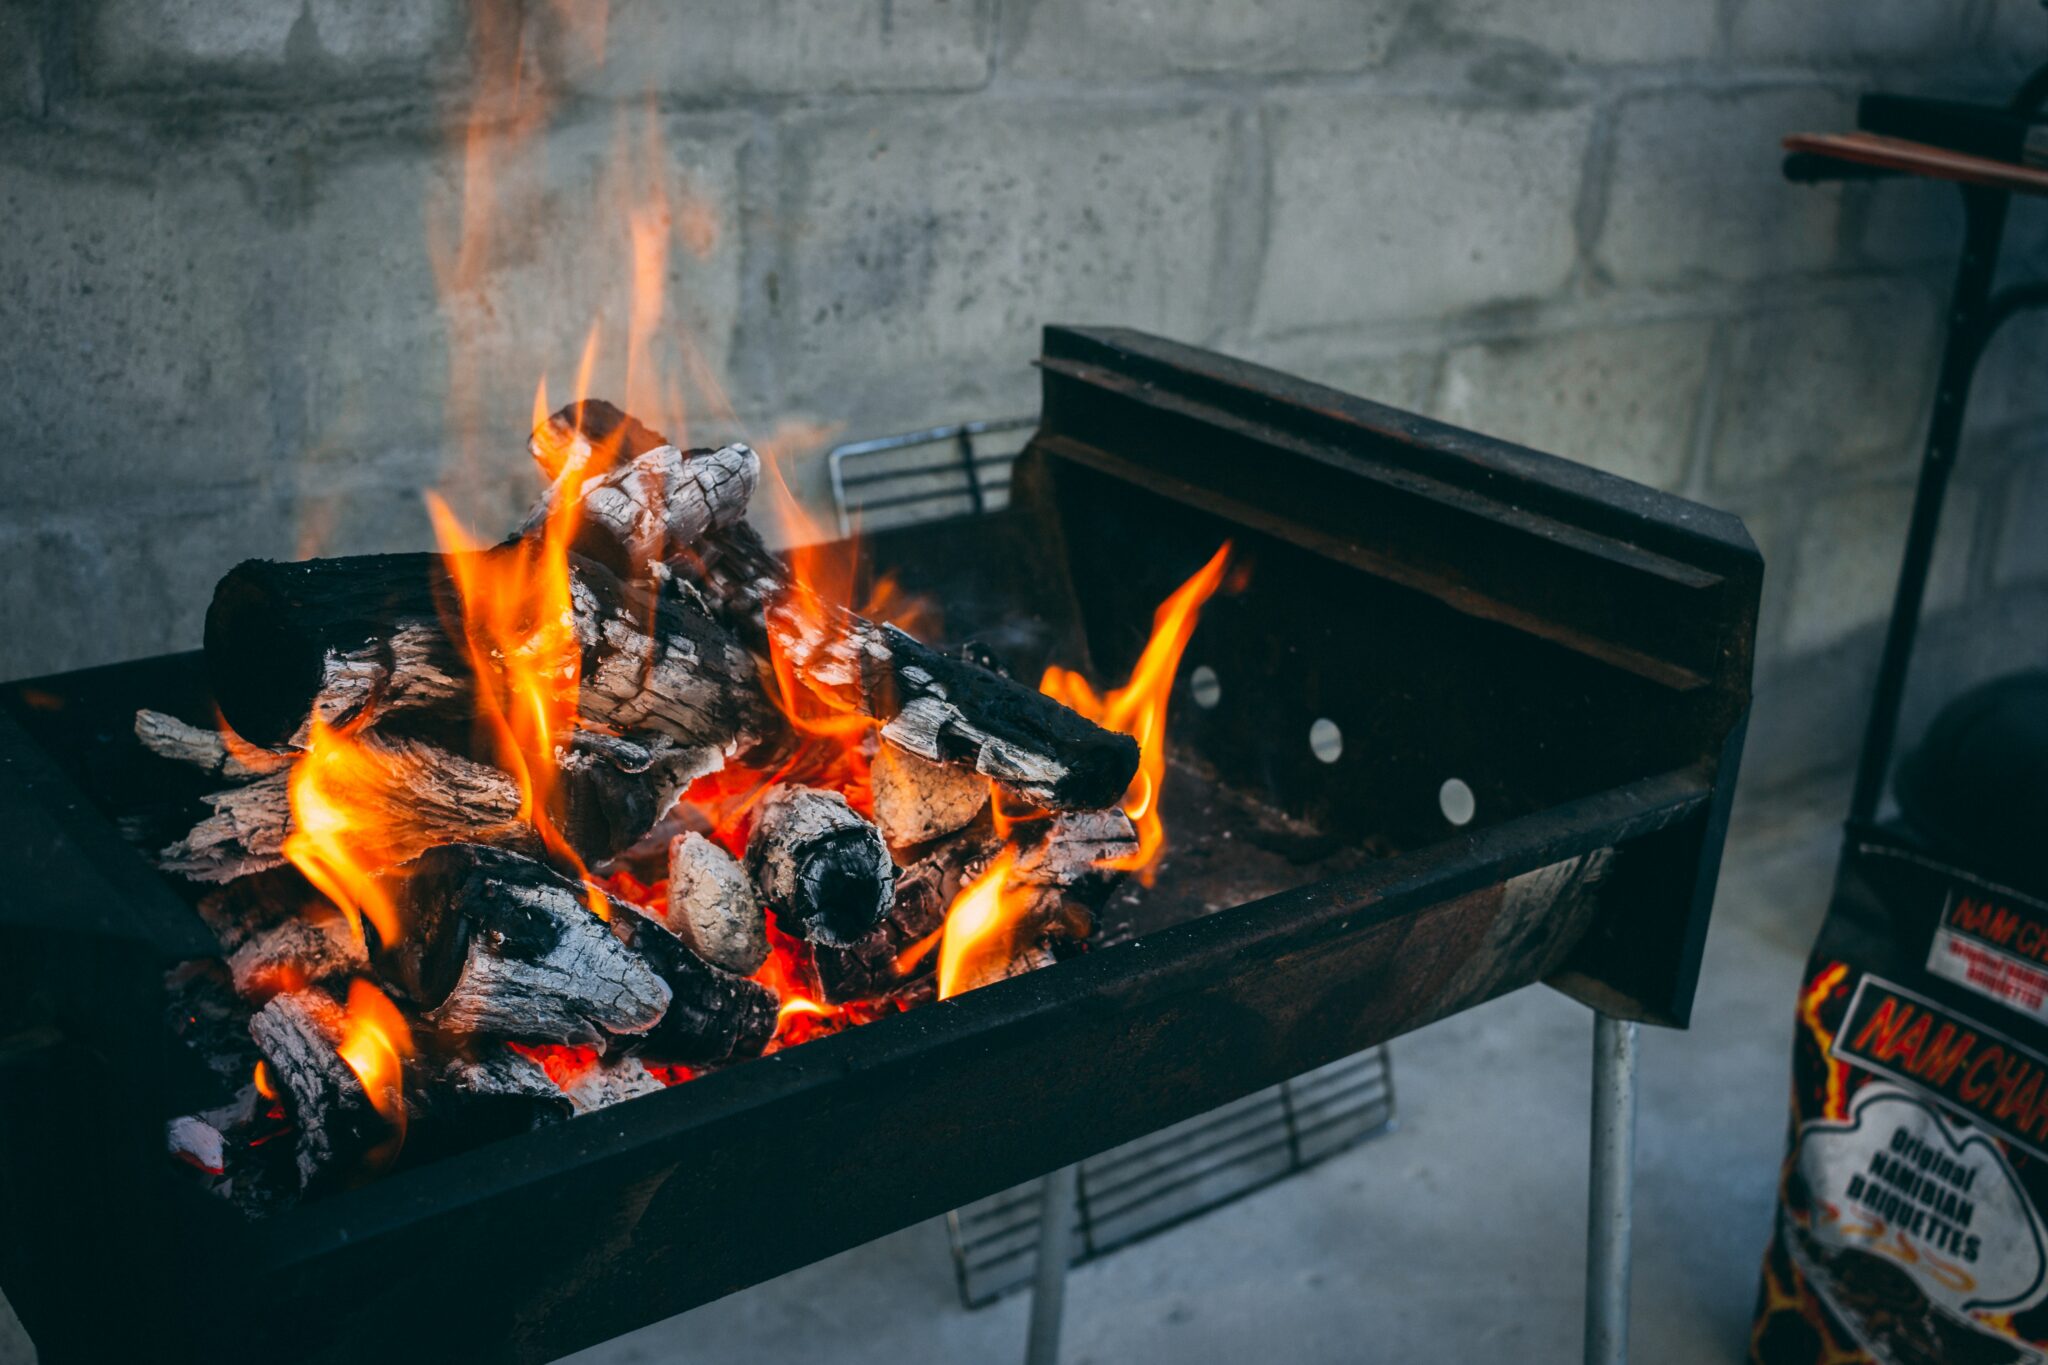 Christmas braai (barbecue) with charcoal and flame